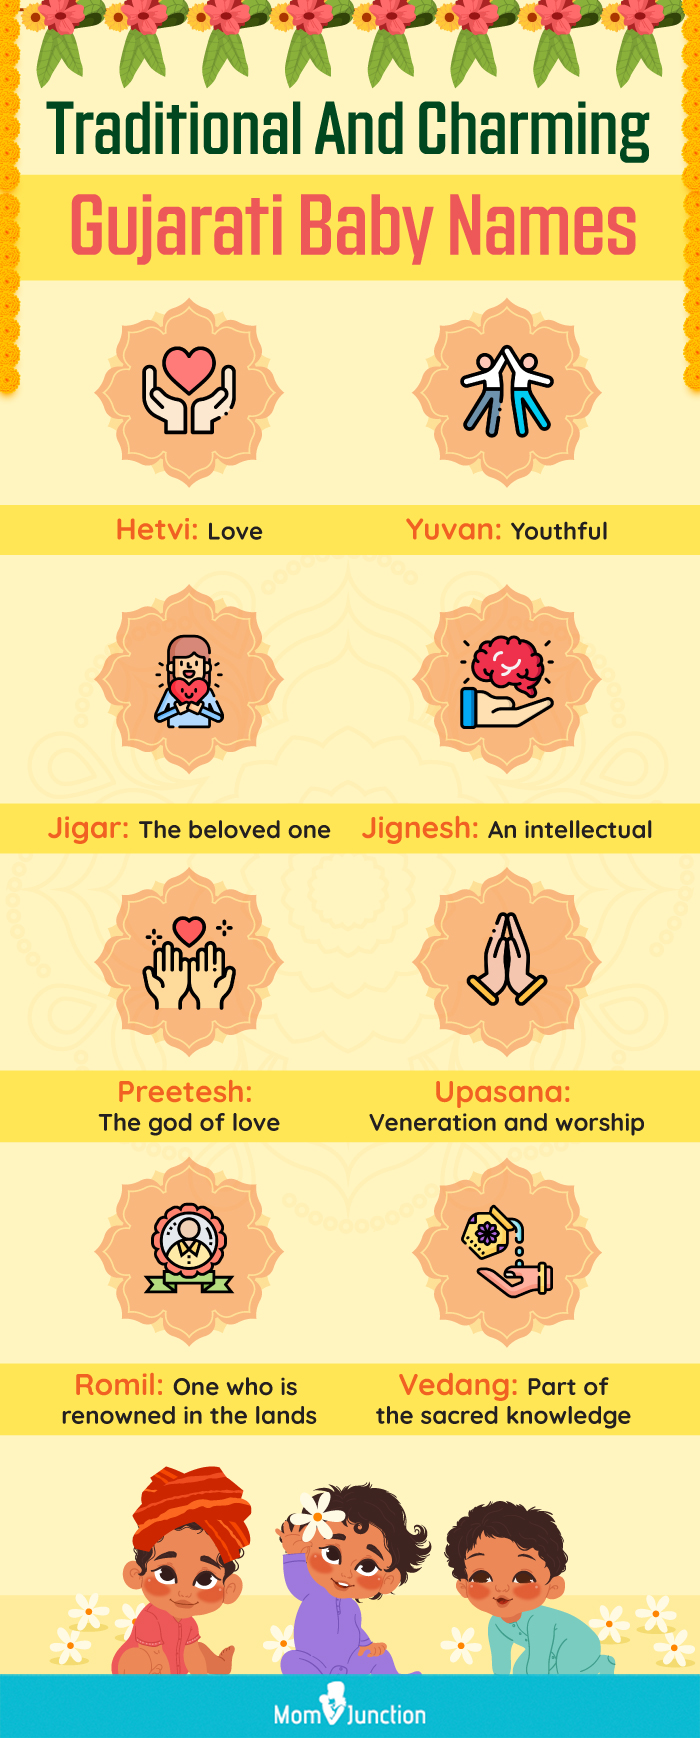 traditional and charming gujarati baby names (infographic)